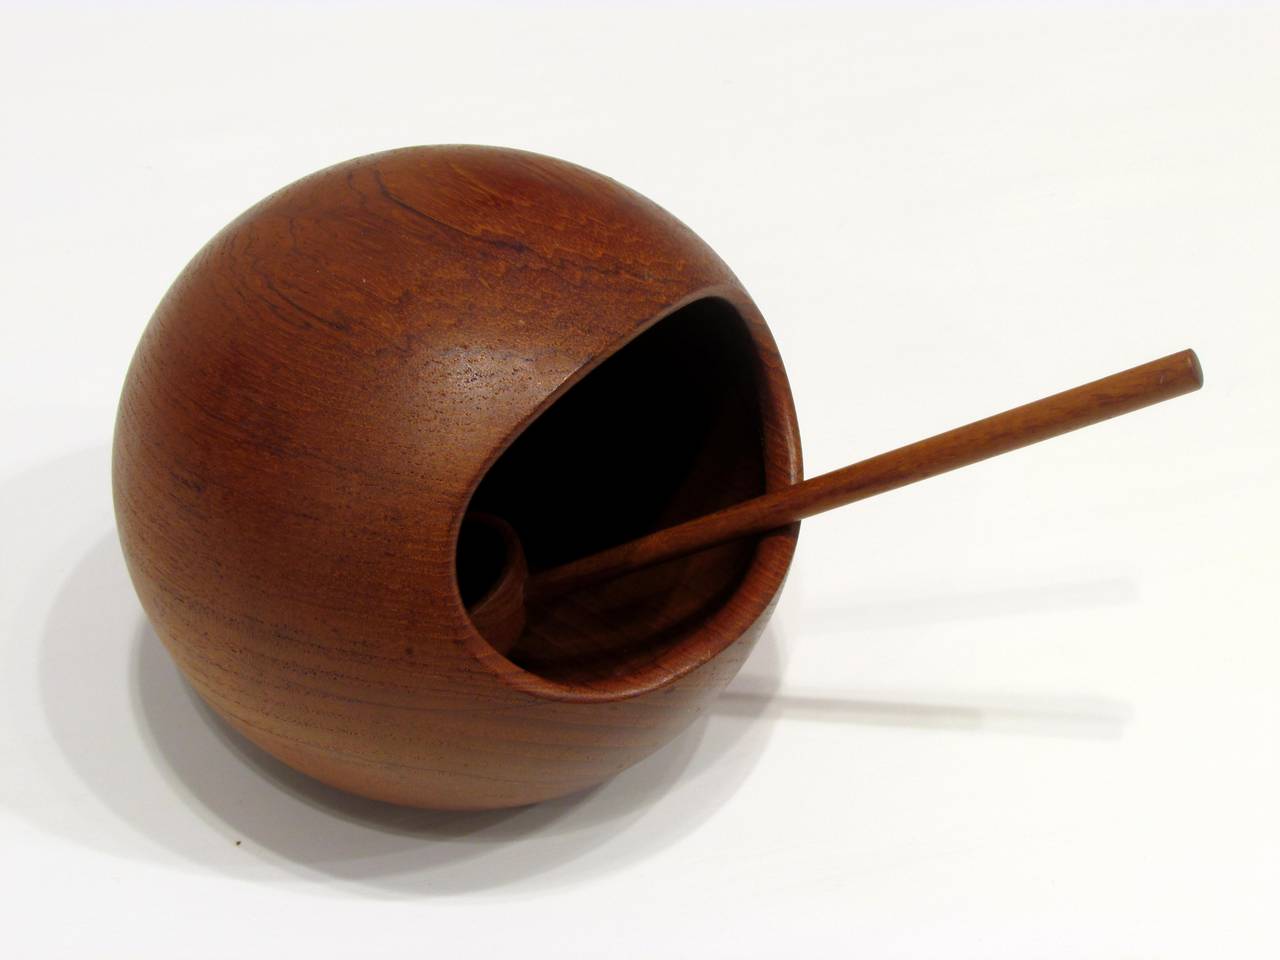 Orb shaped teak bowl with long handled spoon designed by Sigvard Nilsson  for use as a nut bowl both spoon and bowl are marked Sowe Konst